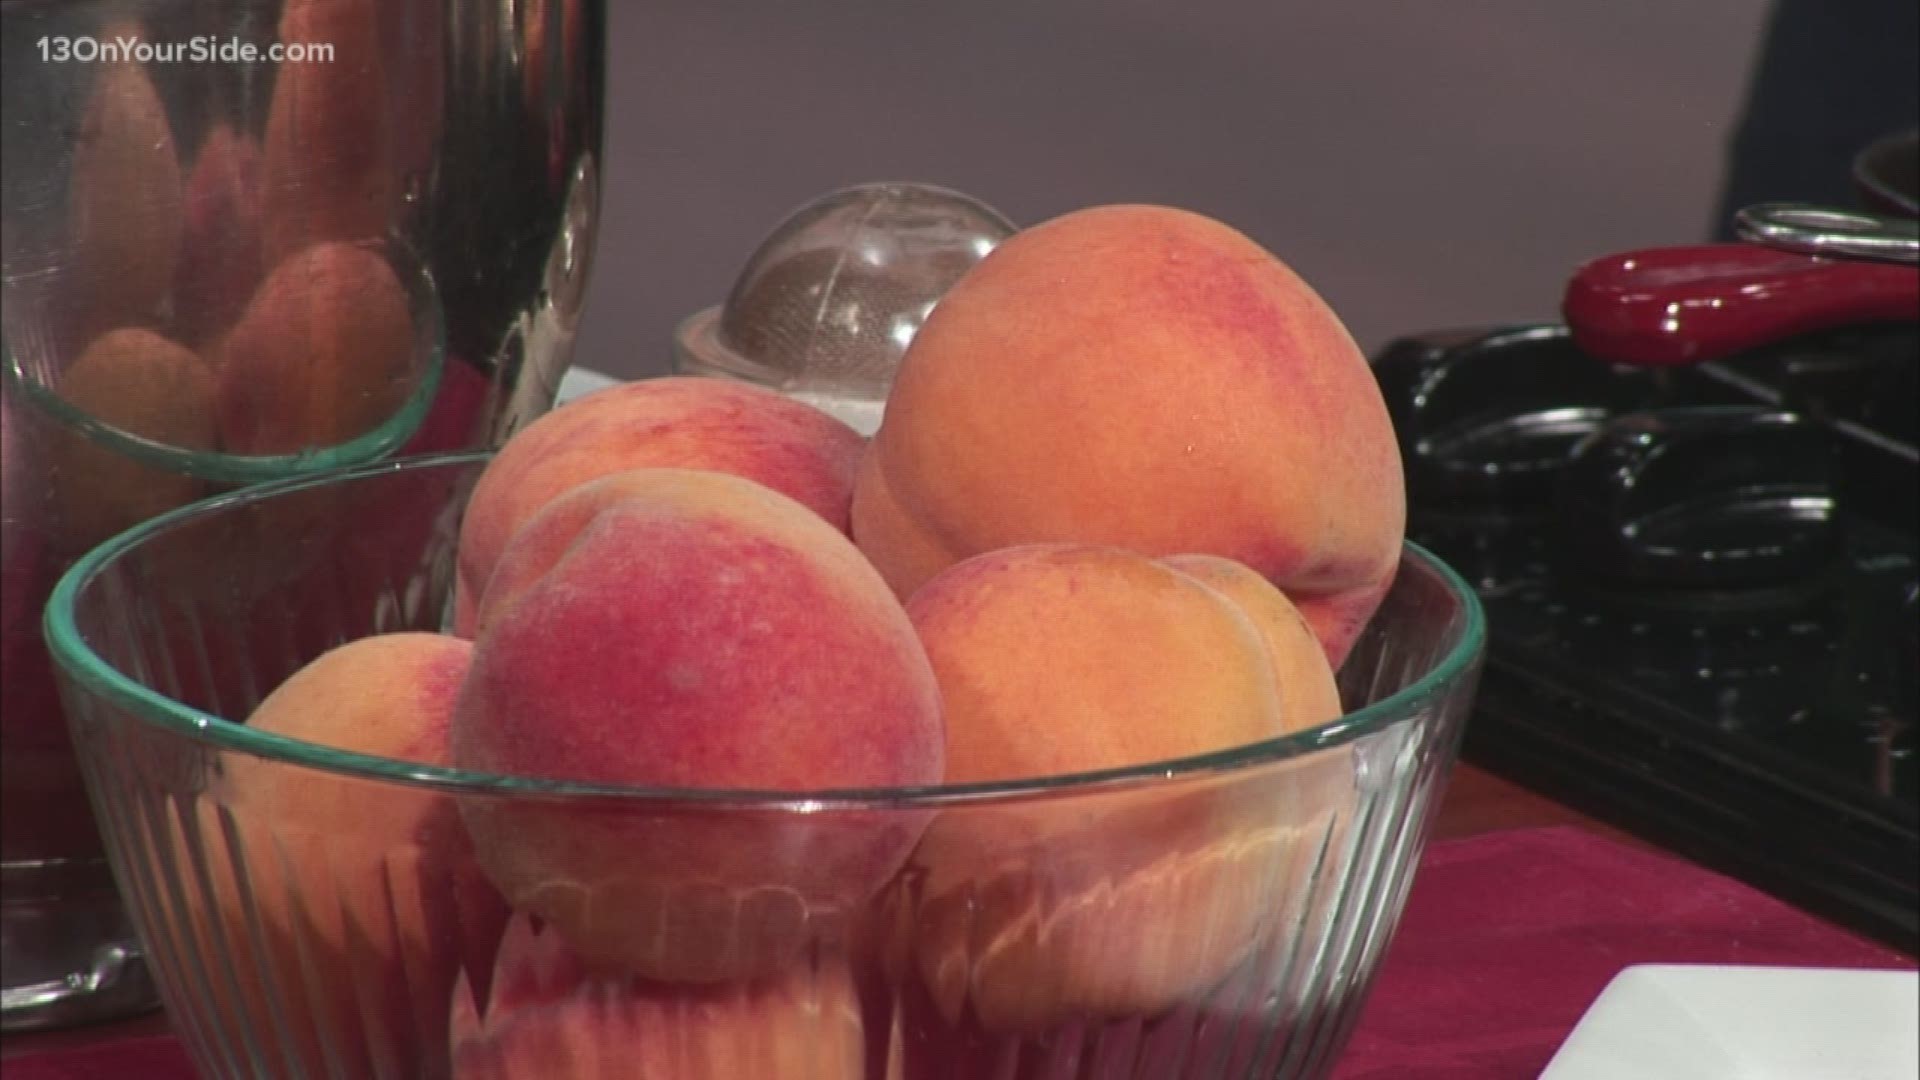 On the stove or on the grill, you can get create an amazing dish with peaches right in your own home. Chef Char shared one of her favorite recipes.